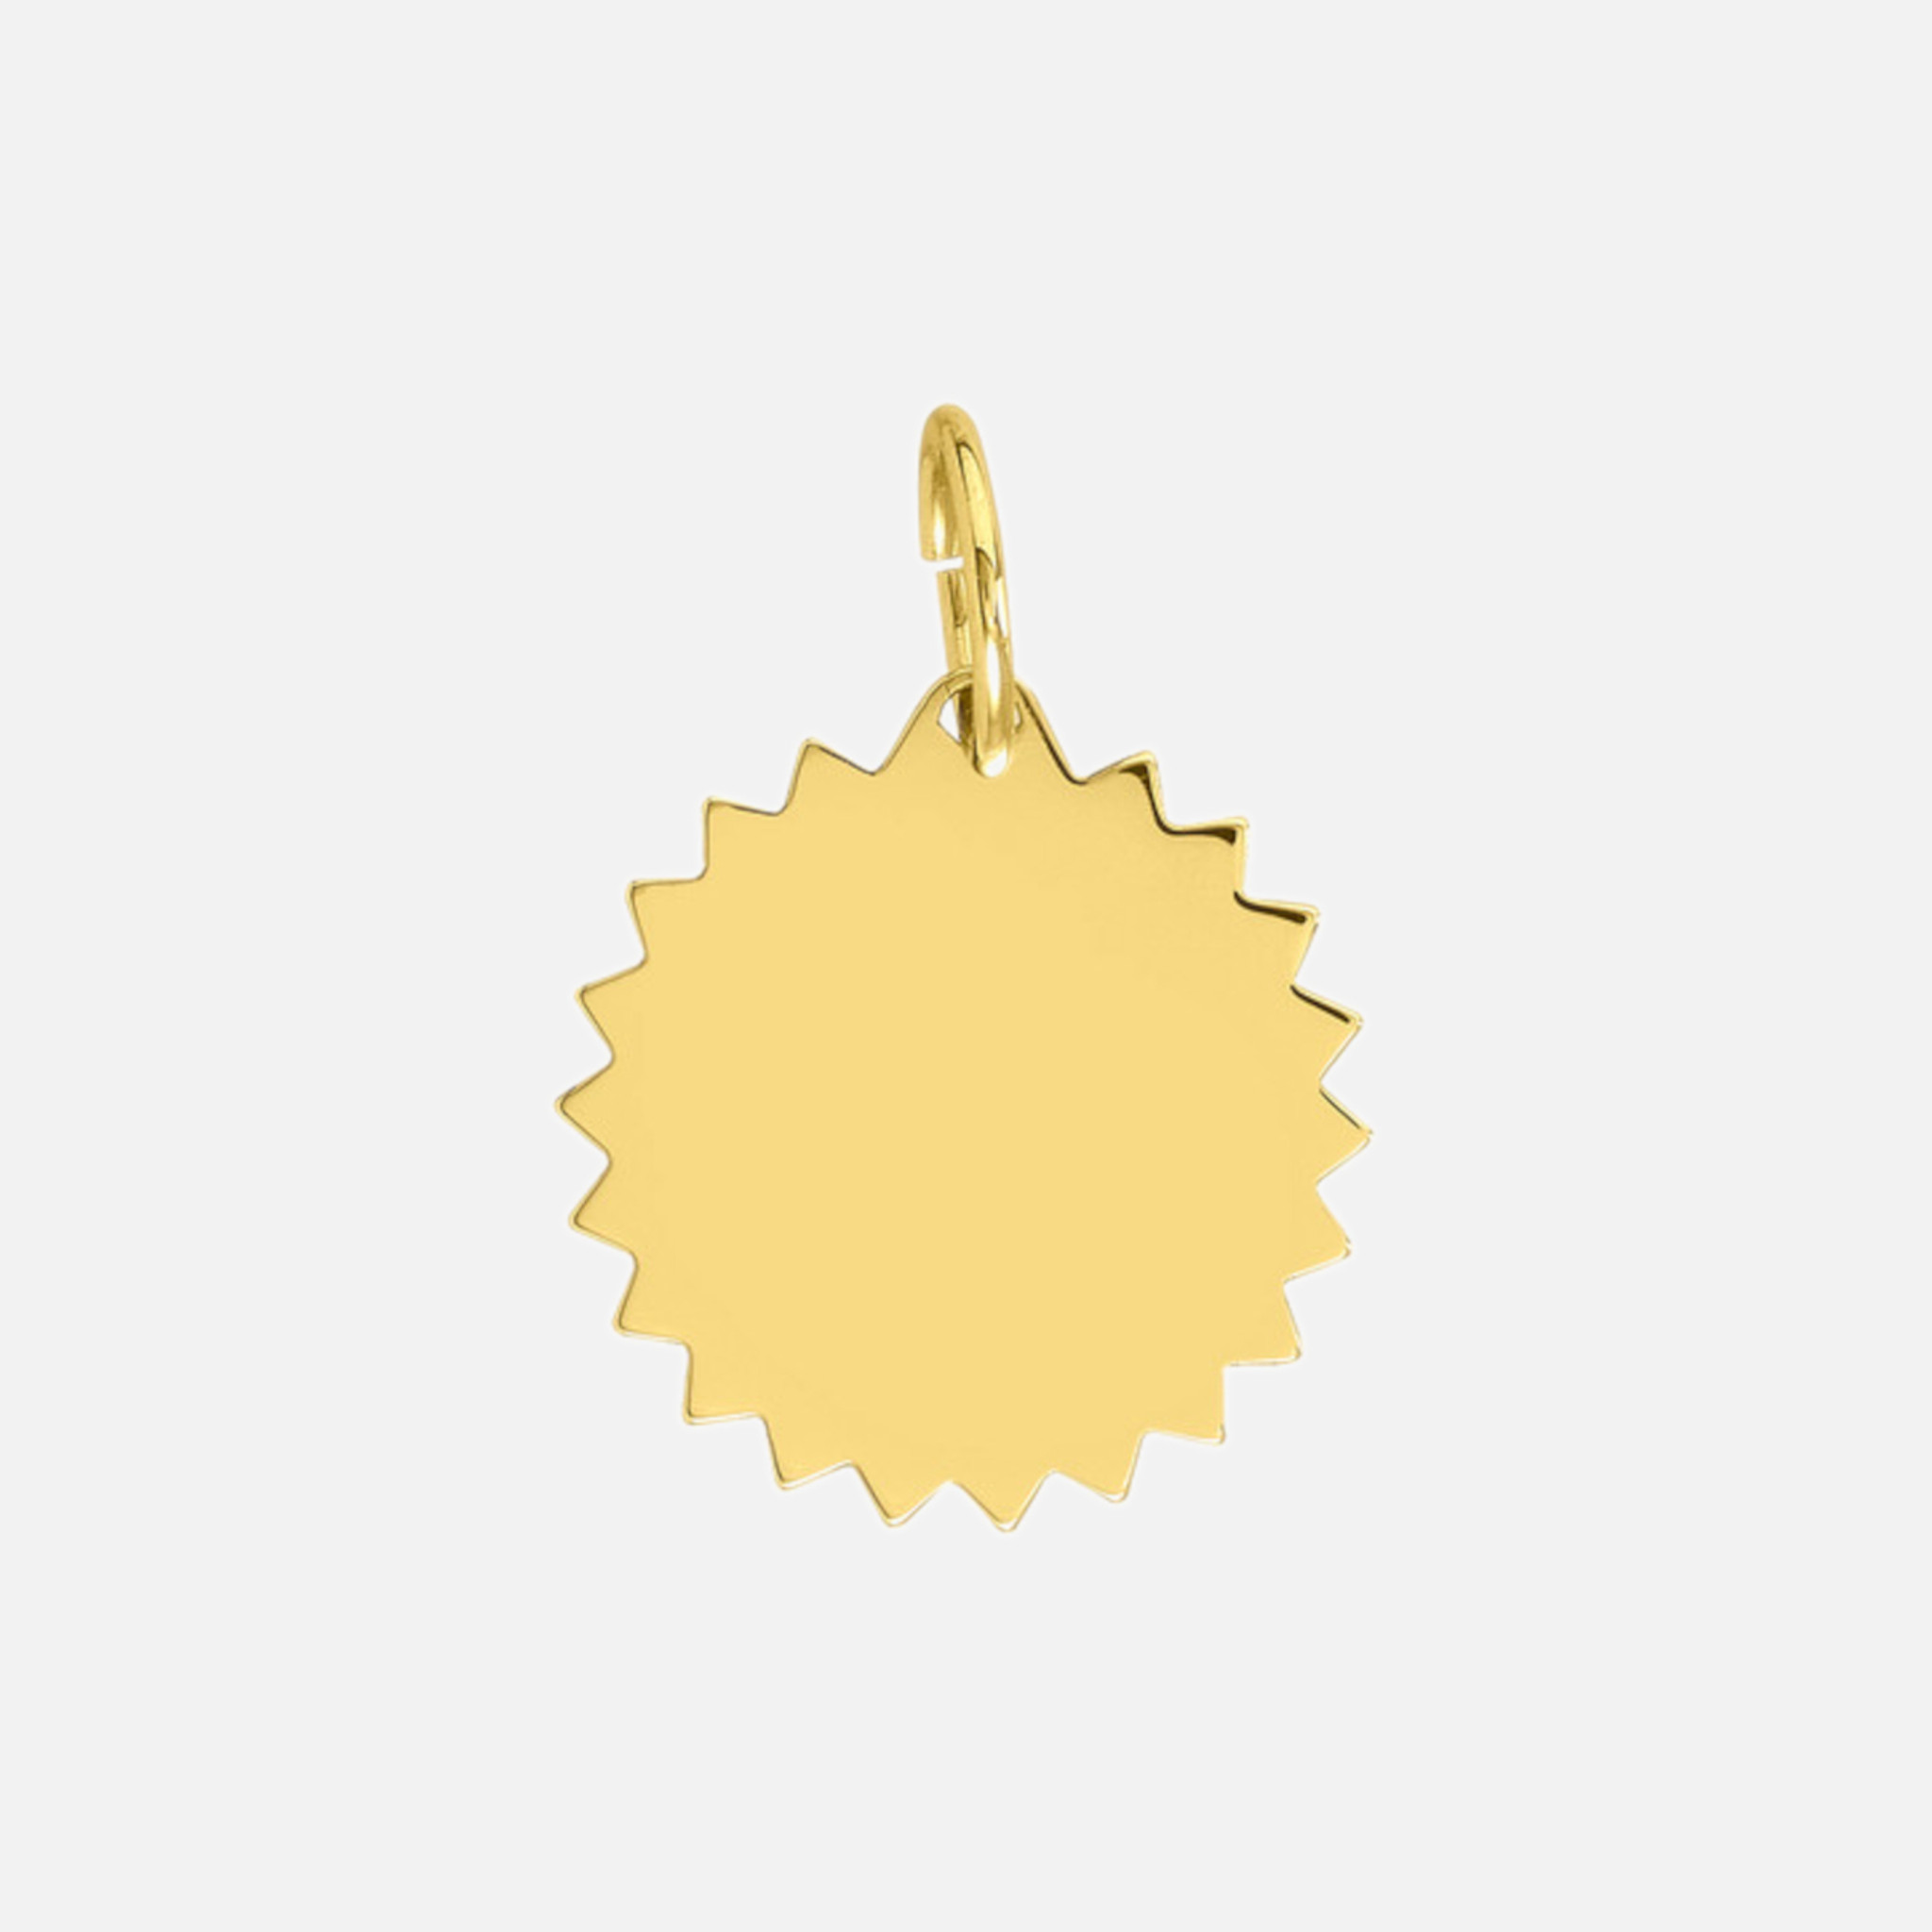 Handcrafted in 14k gold, this engravable charm features modern jagged edges that cast light everywhere you go.